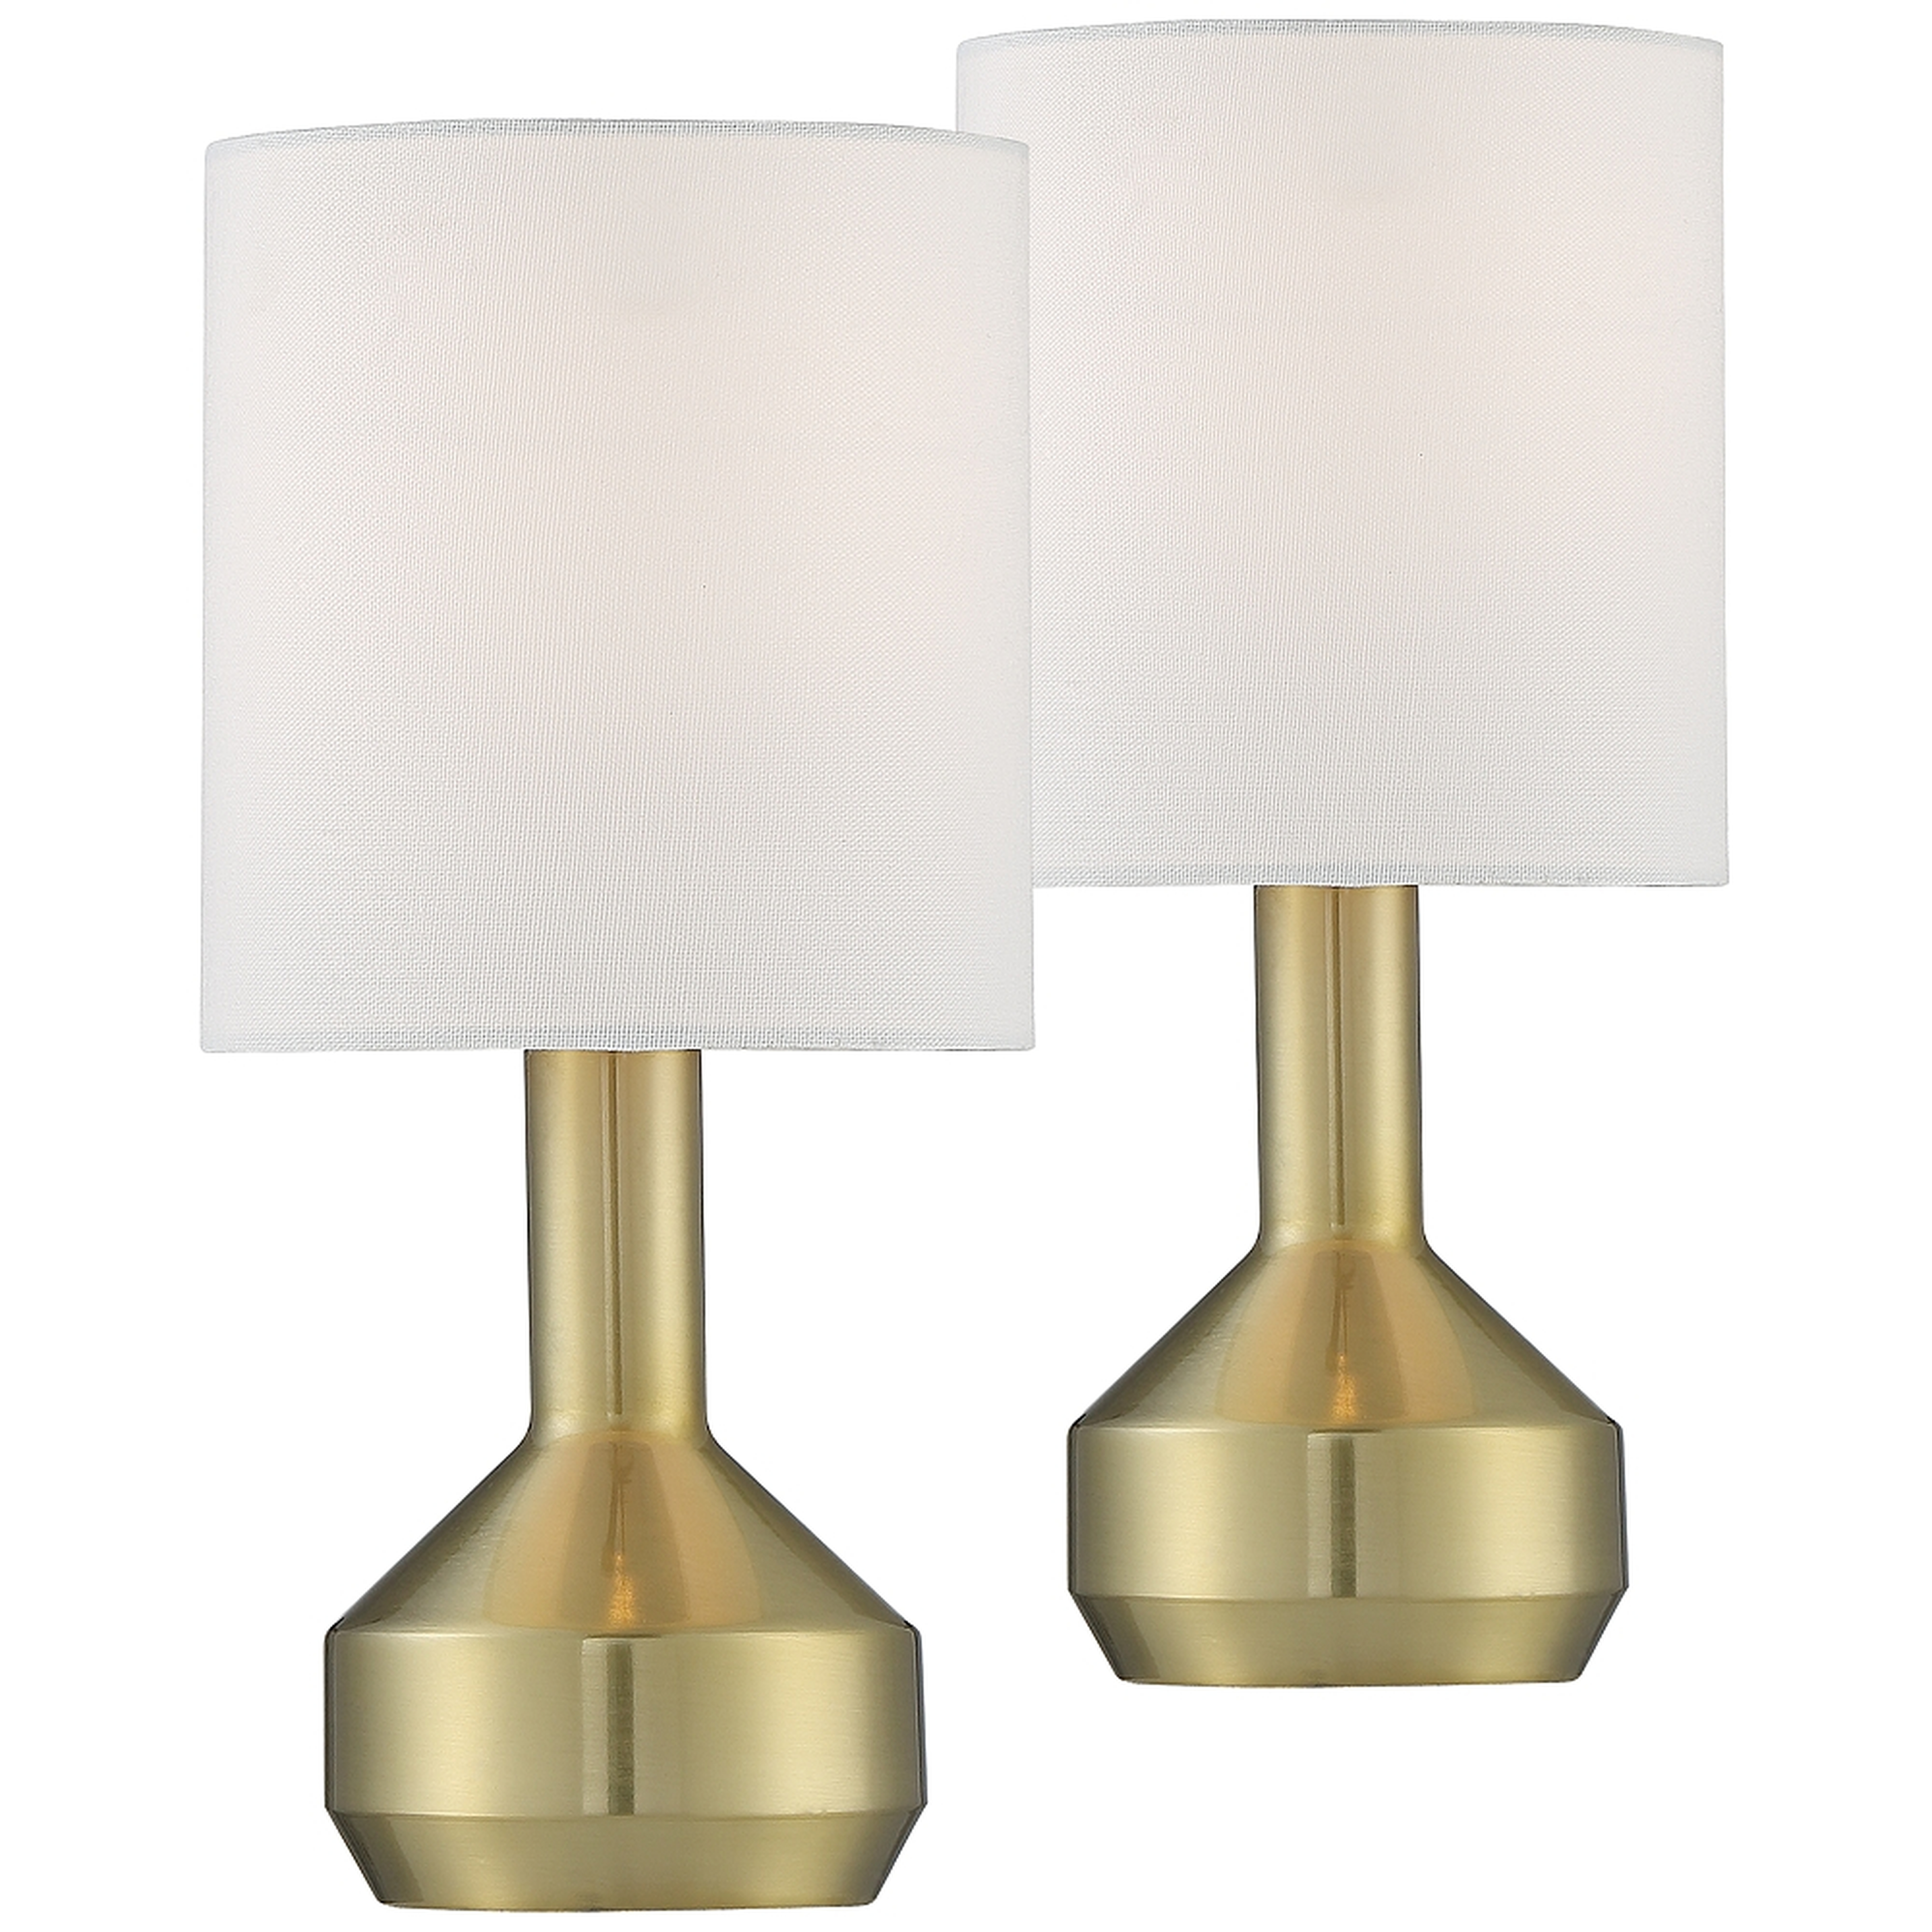 Syd 14 3/4" High Brass Accent Table Lamps Set of 2 - Style # 76A97 - Lamps Plus